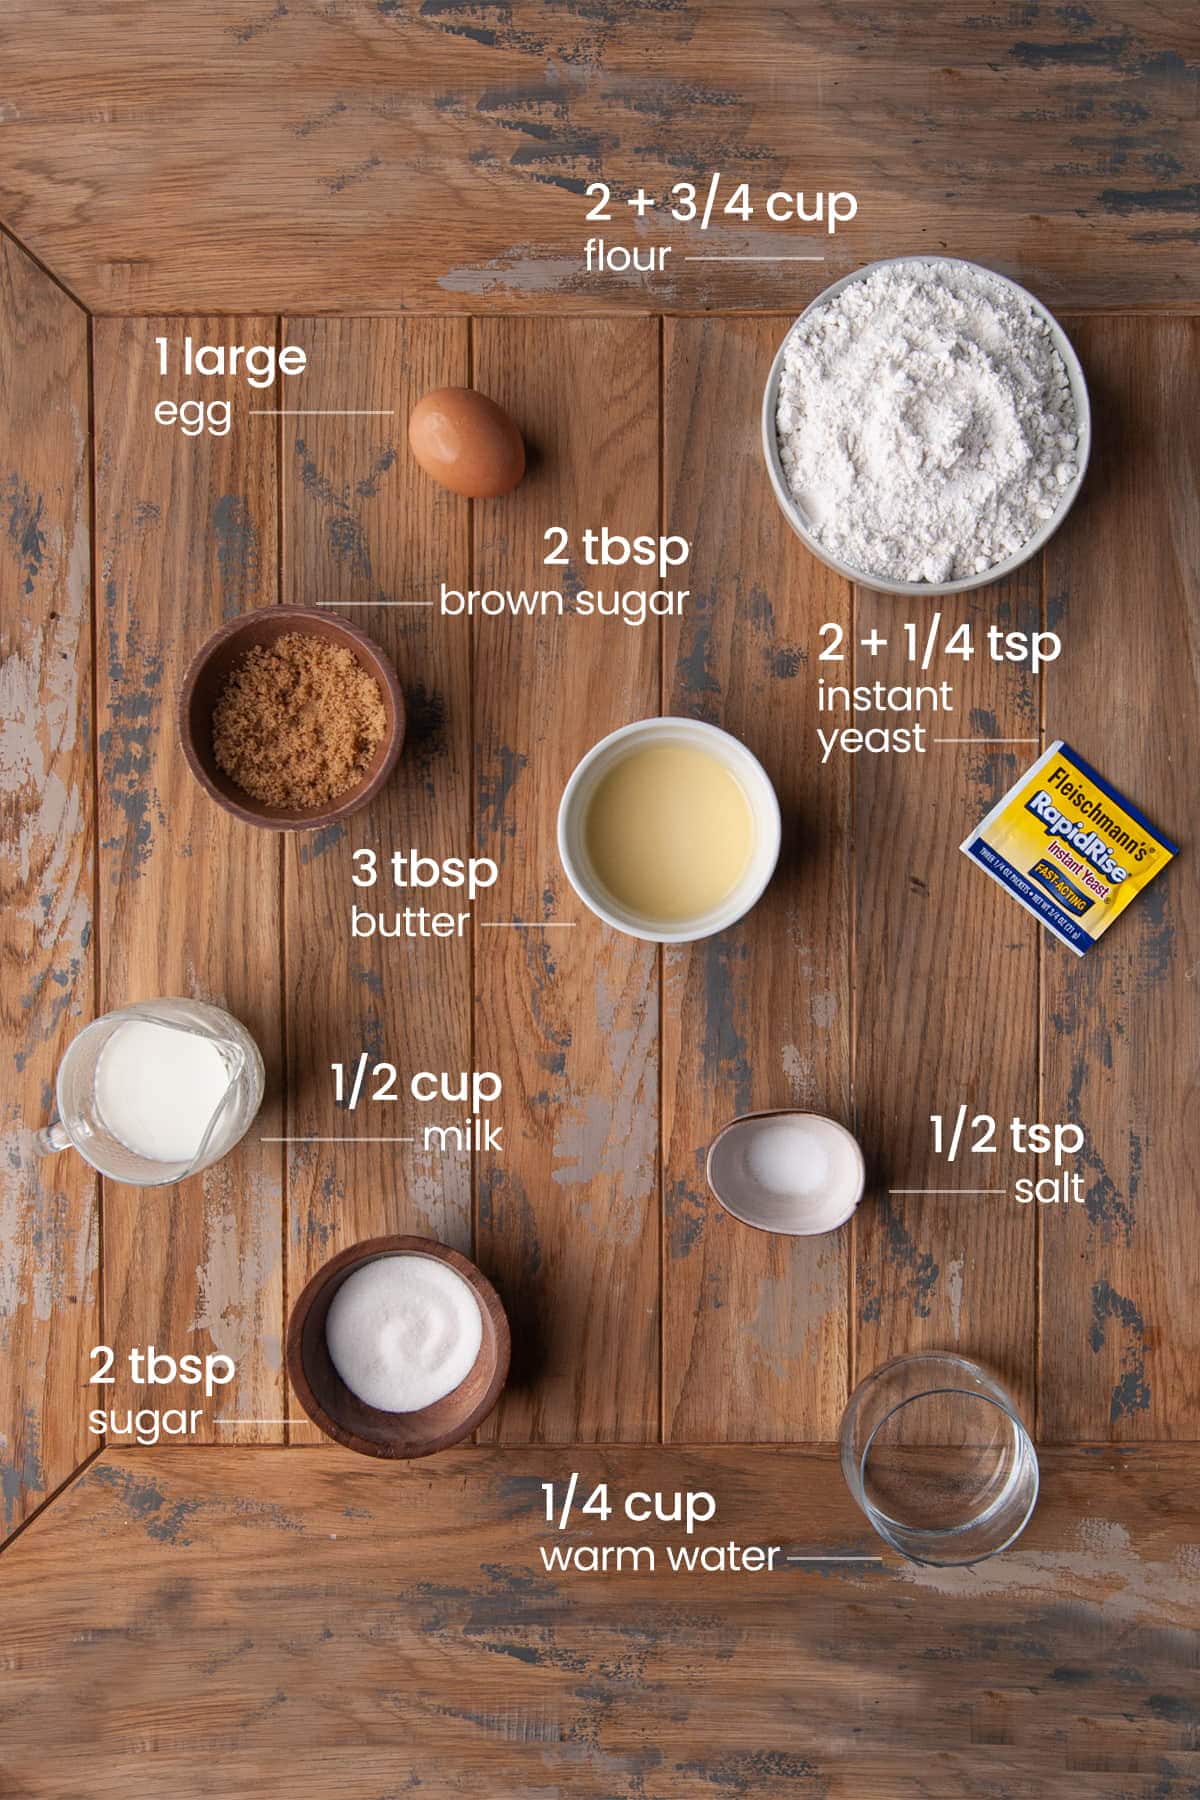 Ingredients for Cinnamon Rolls with Apple Pie Filling - powdered sugar, egg, brown sugar, butter, instant yeast, milk, salt, granulated sugar, and warm water